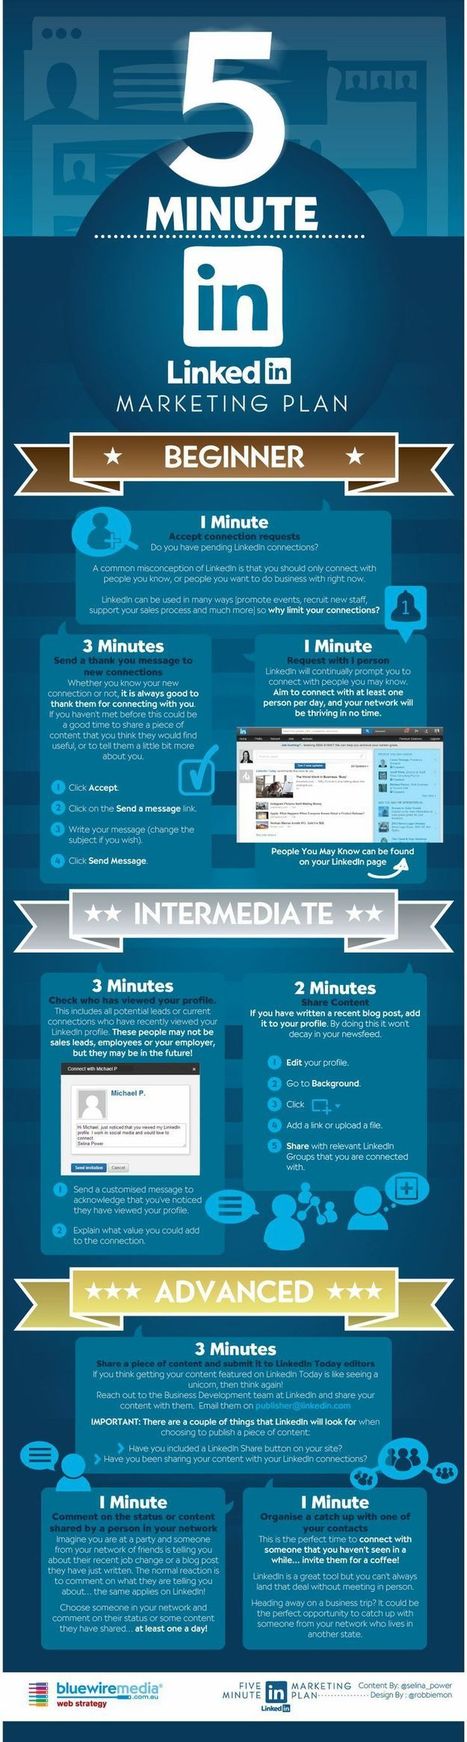 5 Minute in Linkedin Marketing Plan [Infographic] - Blue Wire Media | The MarTech Digest | Scoop.it